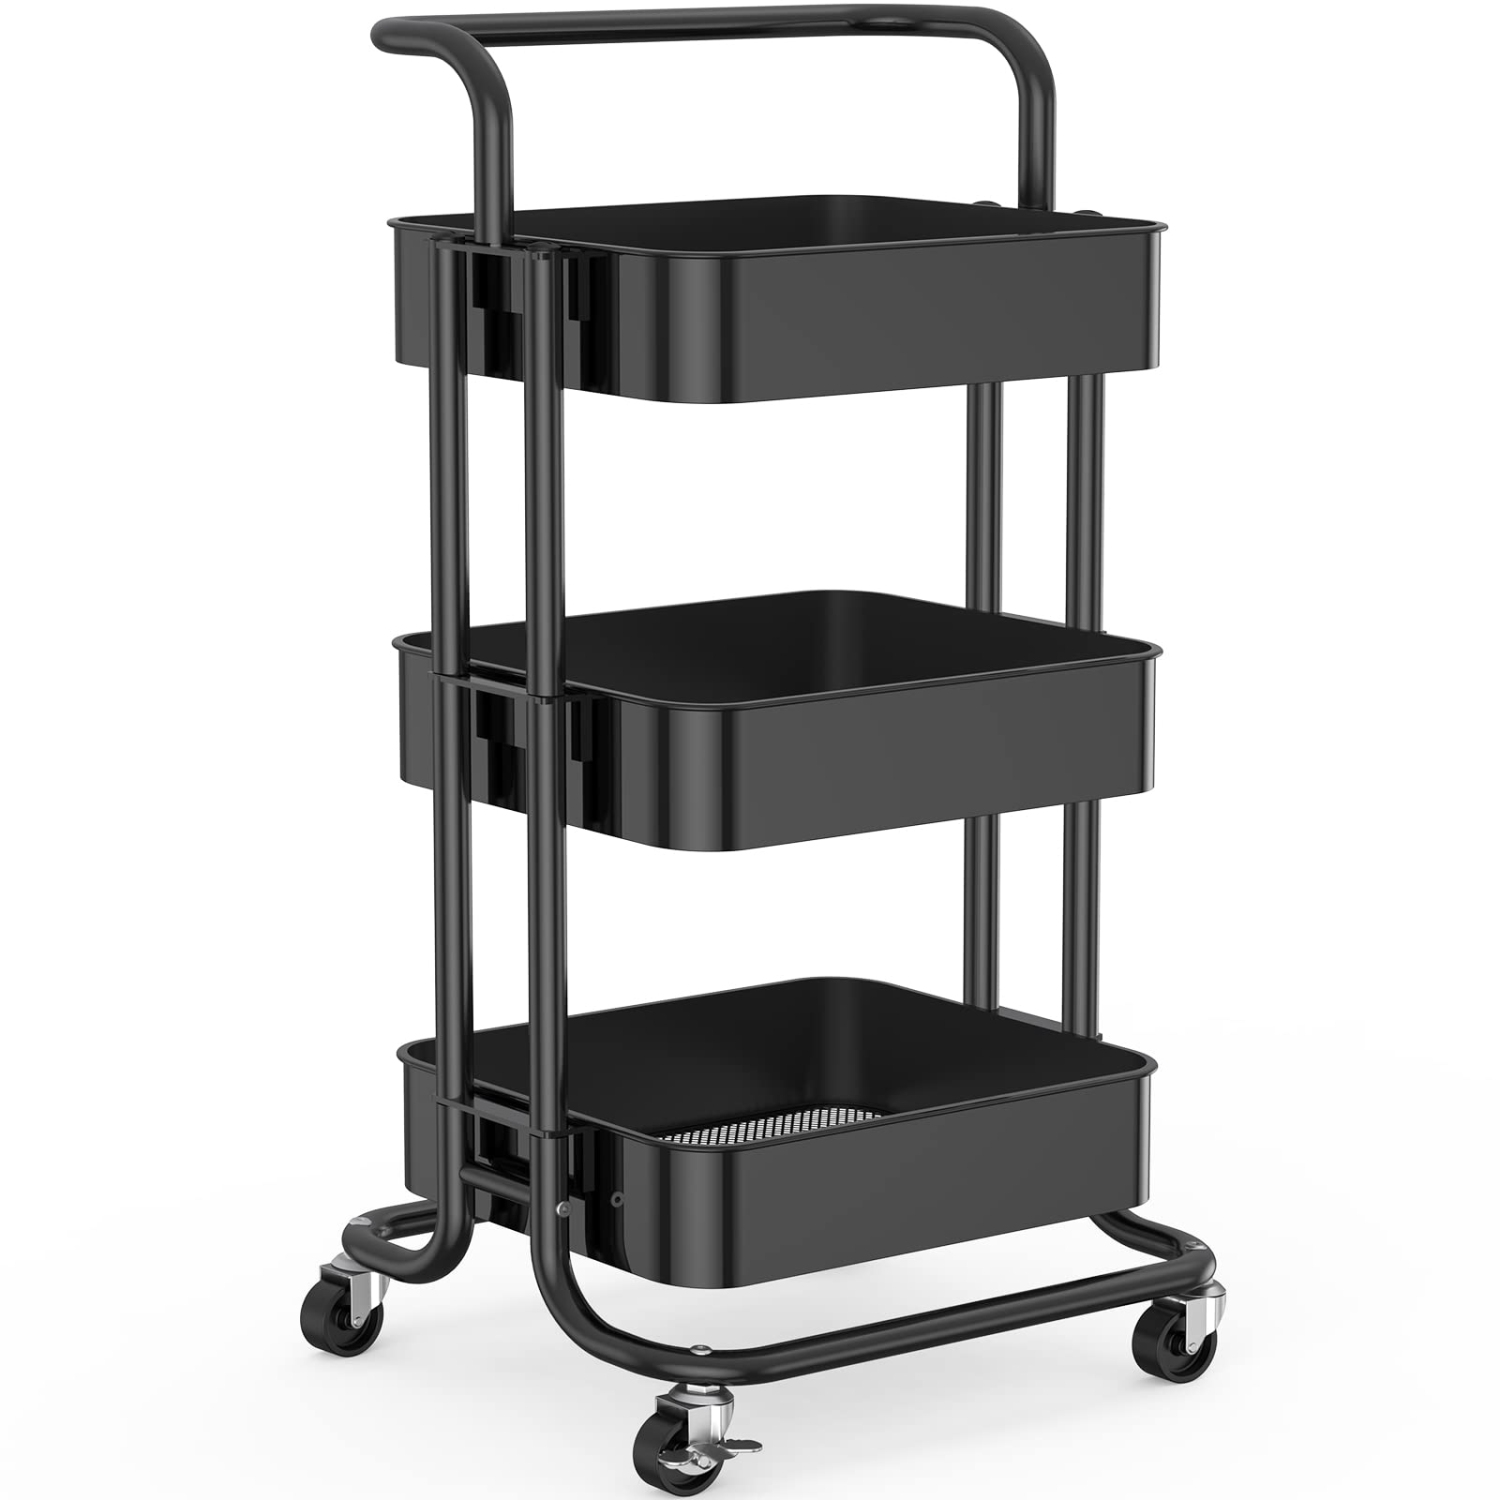 3 Tier Mesh Utility Cart, Rolling Metal Organization Cart with Handle and Lockable Wheels, Multifunctional Storage Shelves for Kitchen Living Room Office, Black